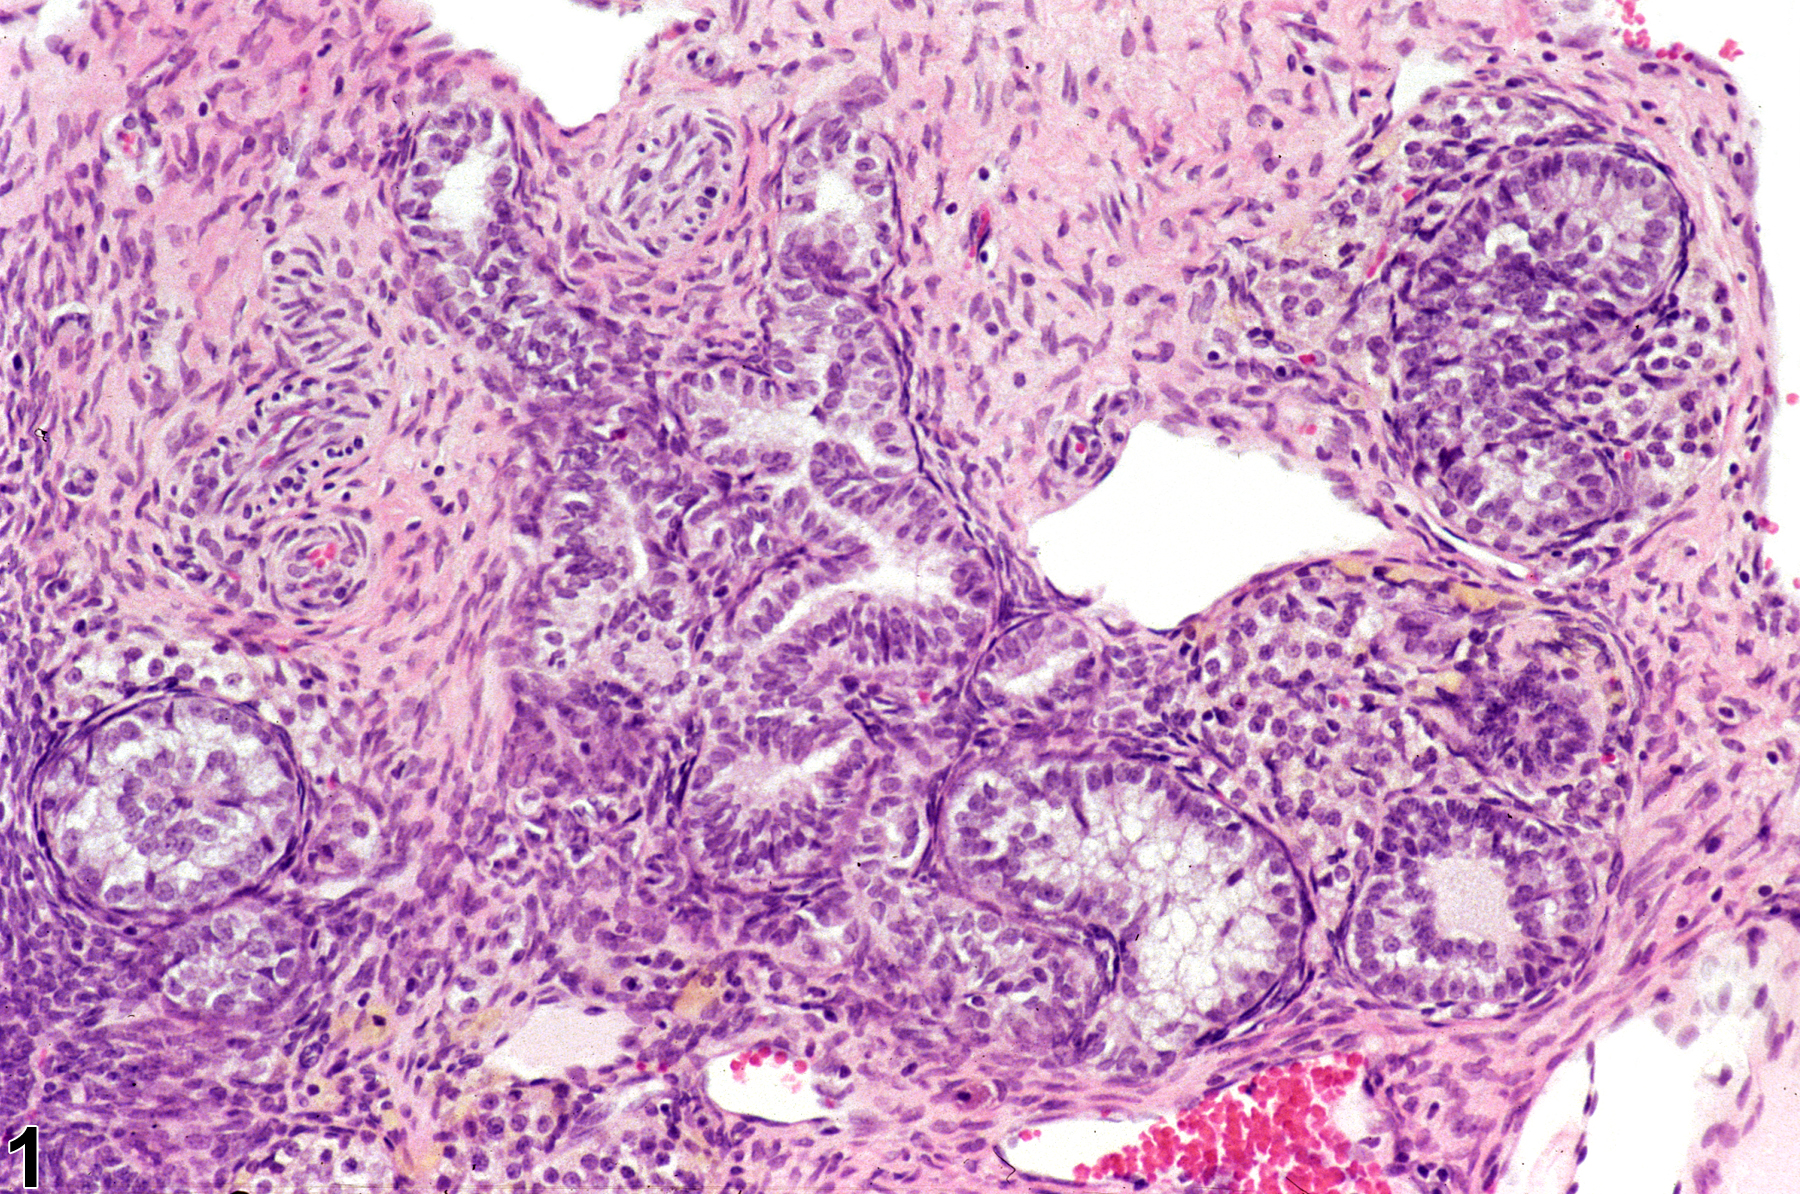 Image of hyperplasia, sertoliform in the ovary from a female F344/N rat in a chronic study